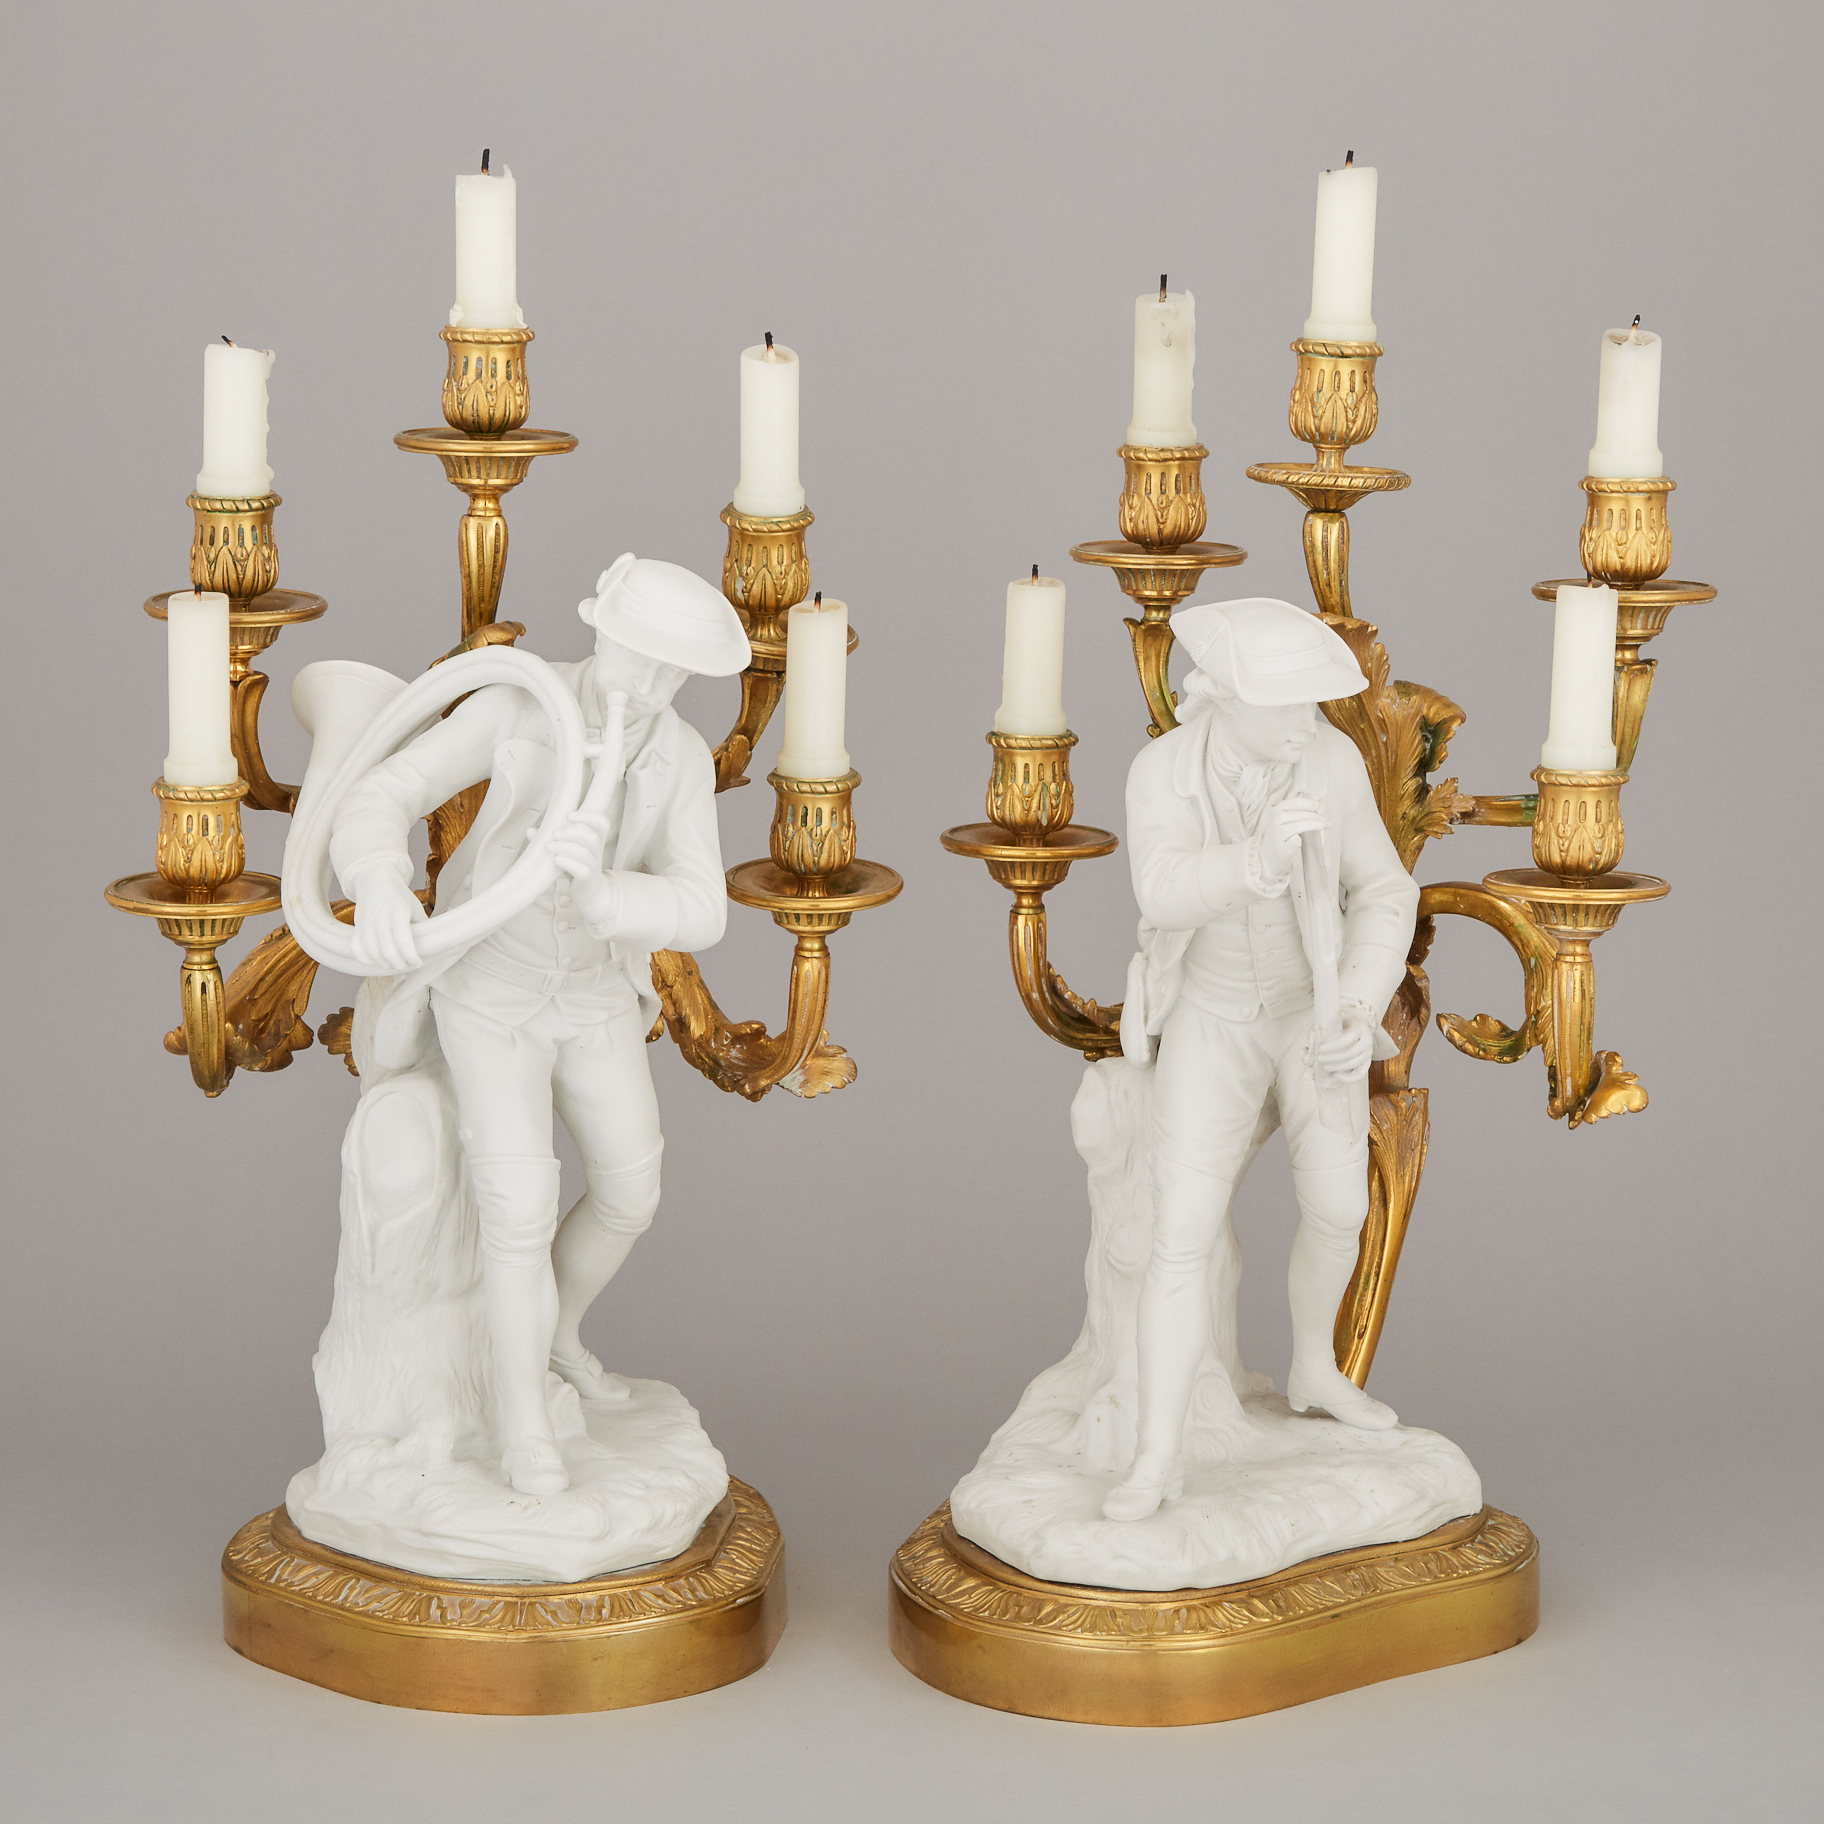 Pair of French Louis XV Style Ormolu and Parian Figural Candelabra, mid 20th century